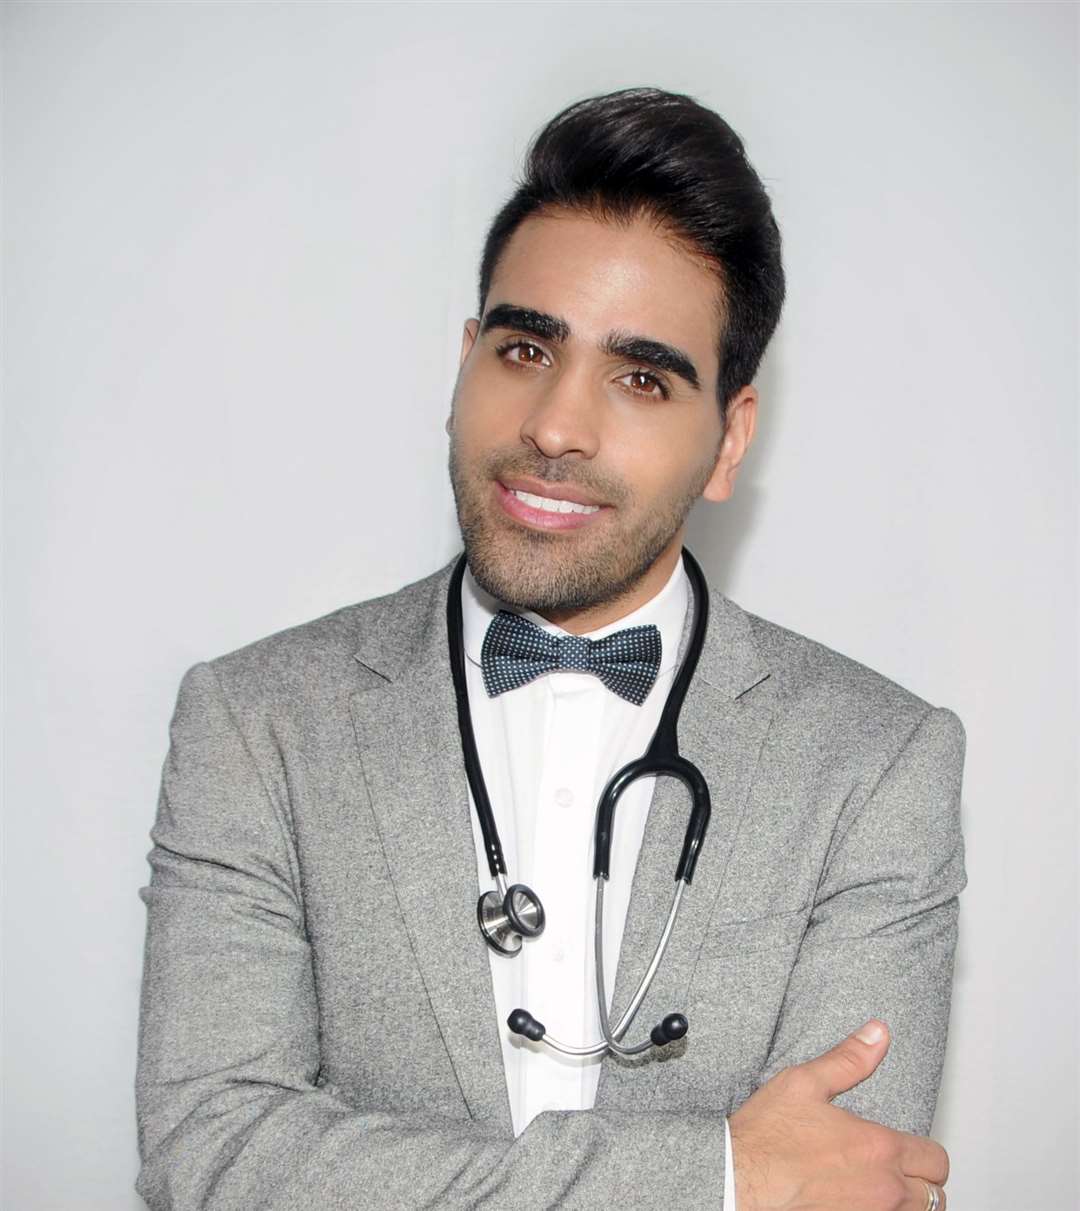 Doctor Ranj Singh, who appeared on Strictly Come Dancing, will be at Bluewater later this month